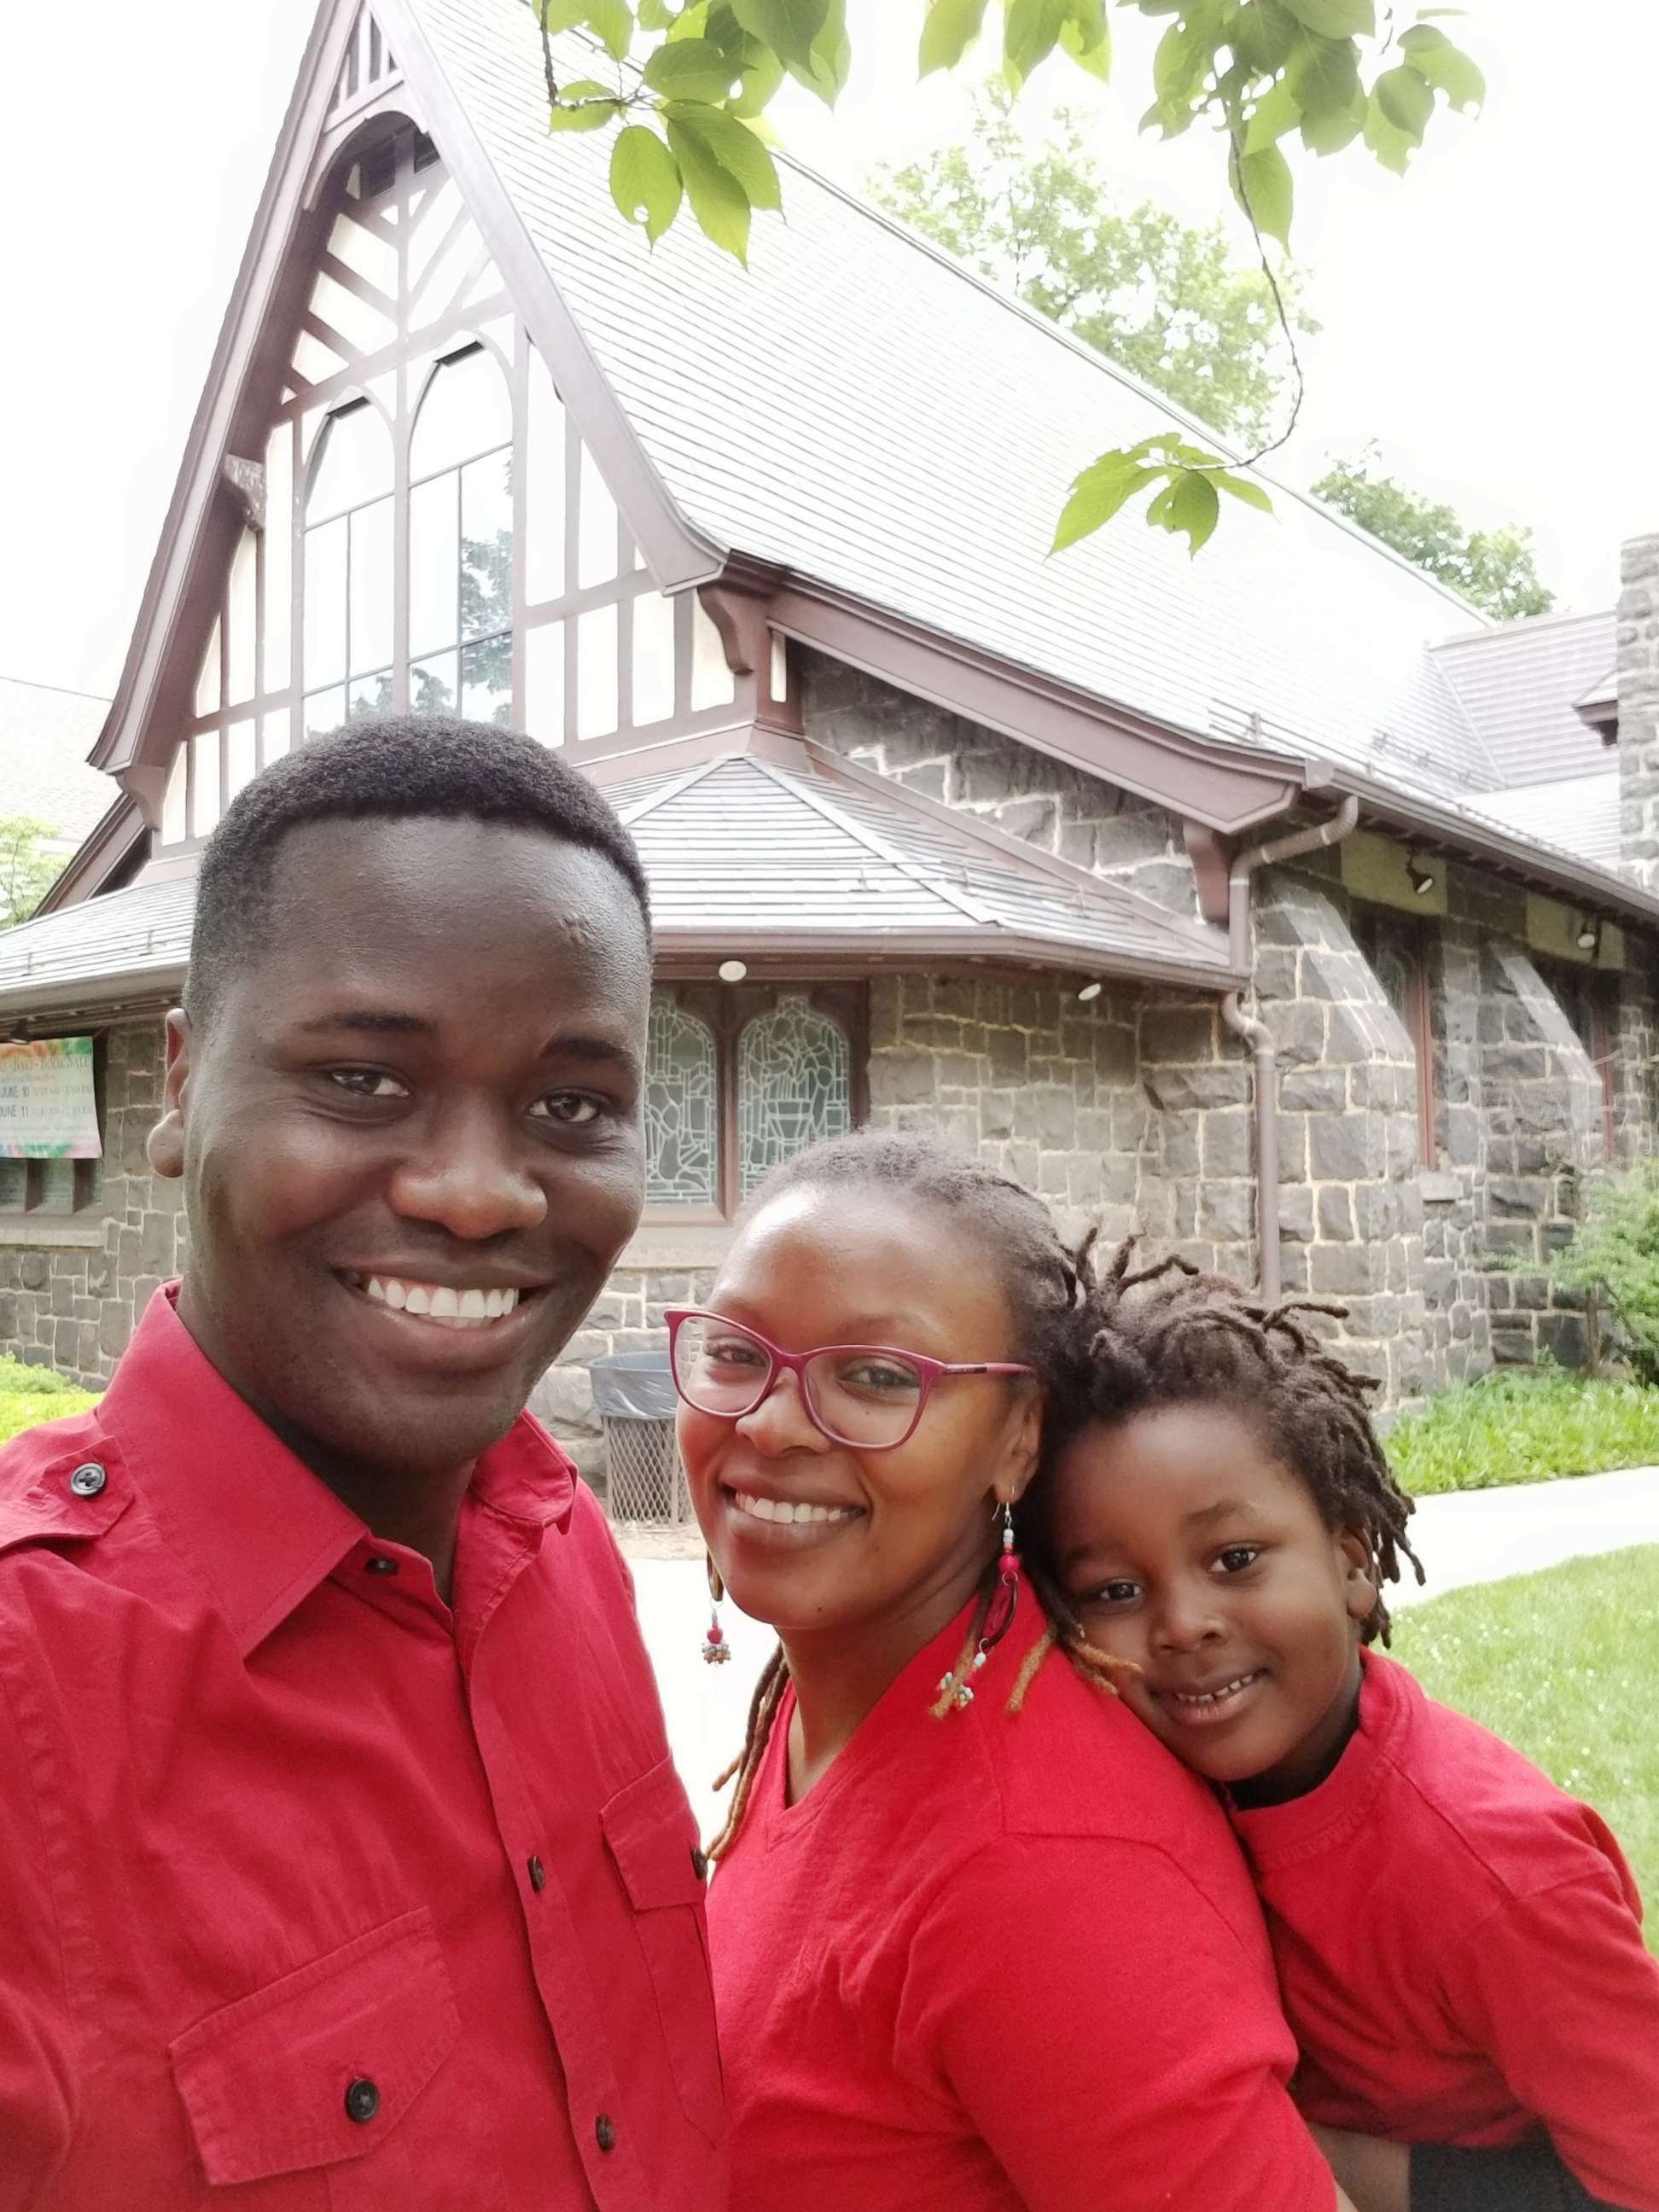 PHOTO: James and Josephine Okungu are pictured with their son, Jayden, after a church service in this undated family photo.